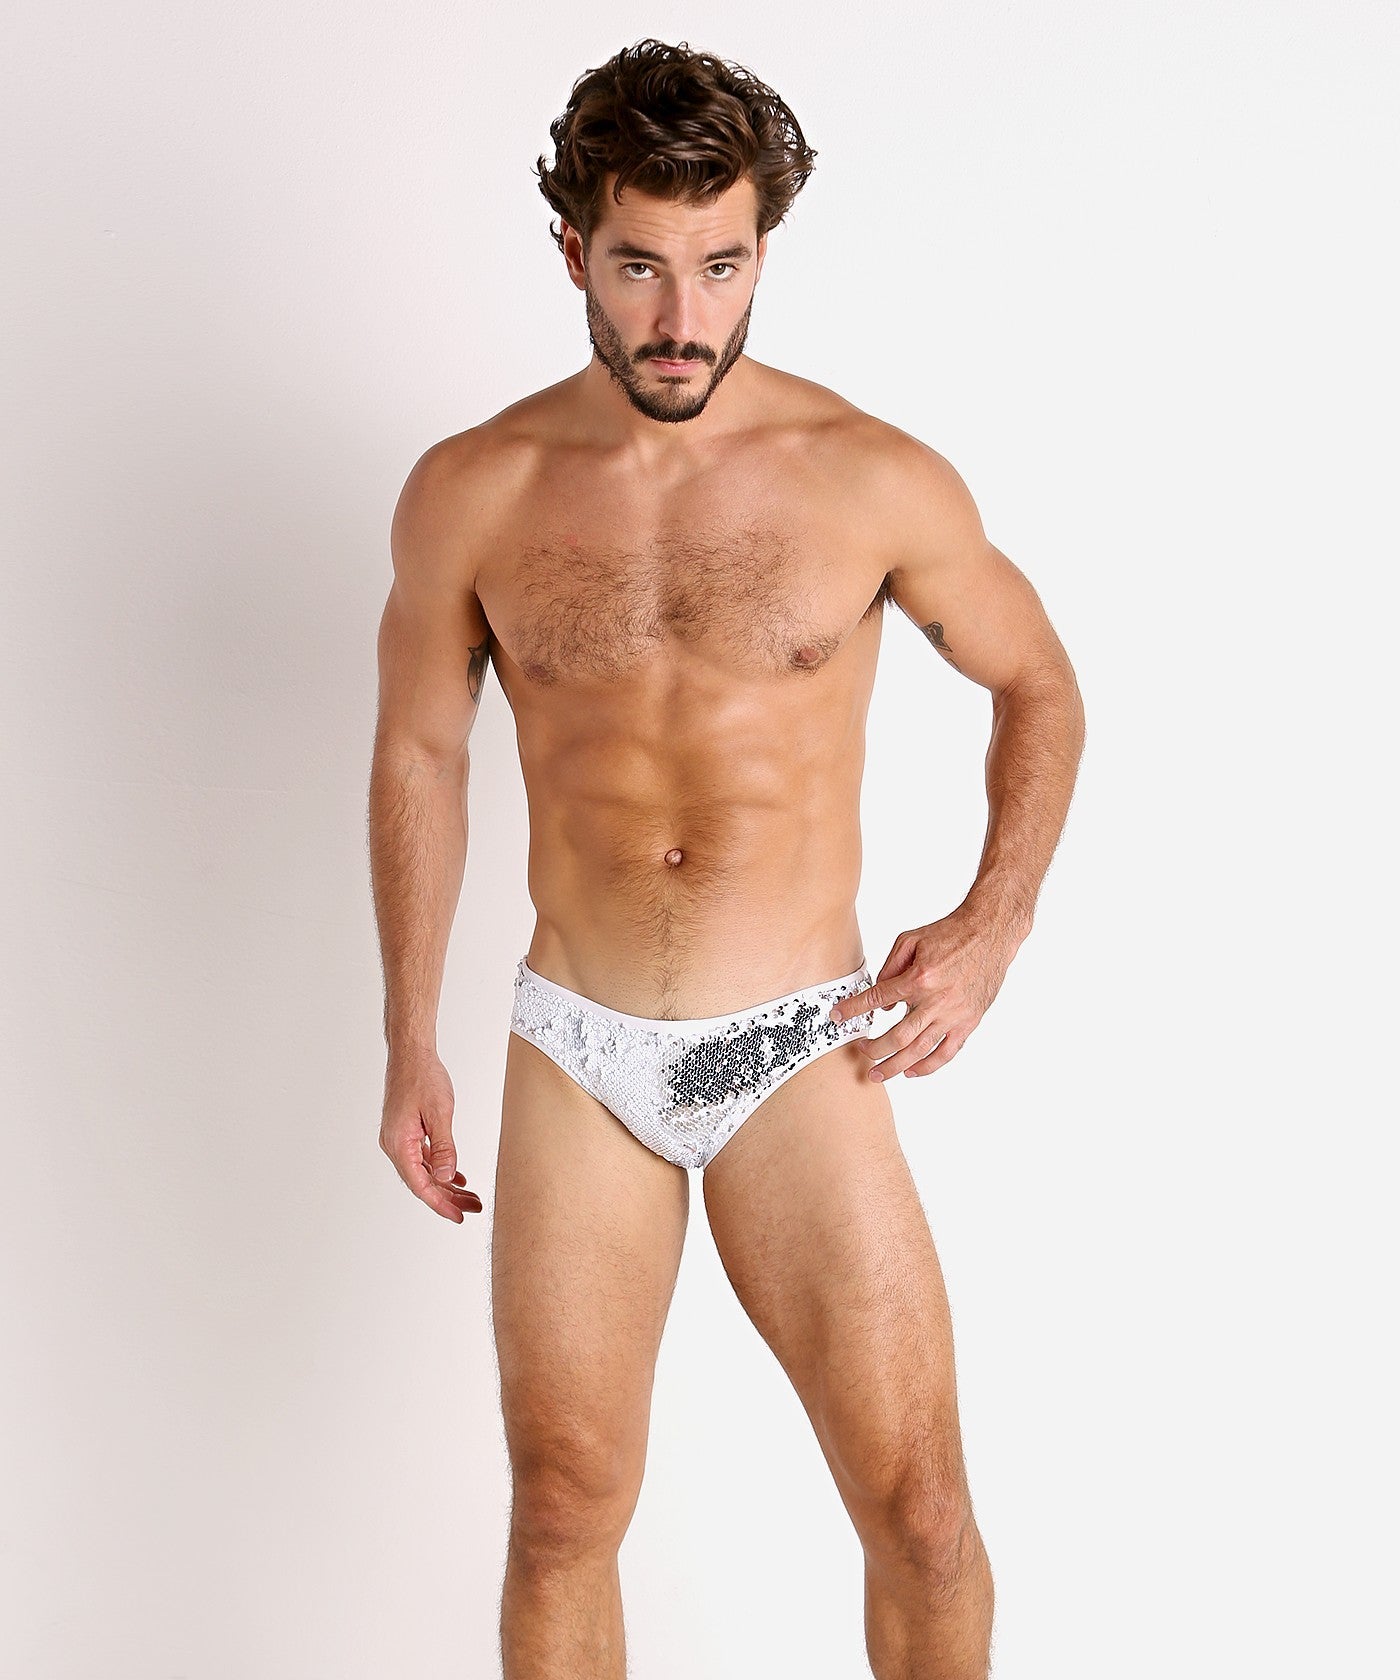 SEQUINED SPARKLE BRIEFS - DealByEthan.gay